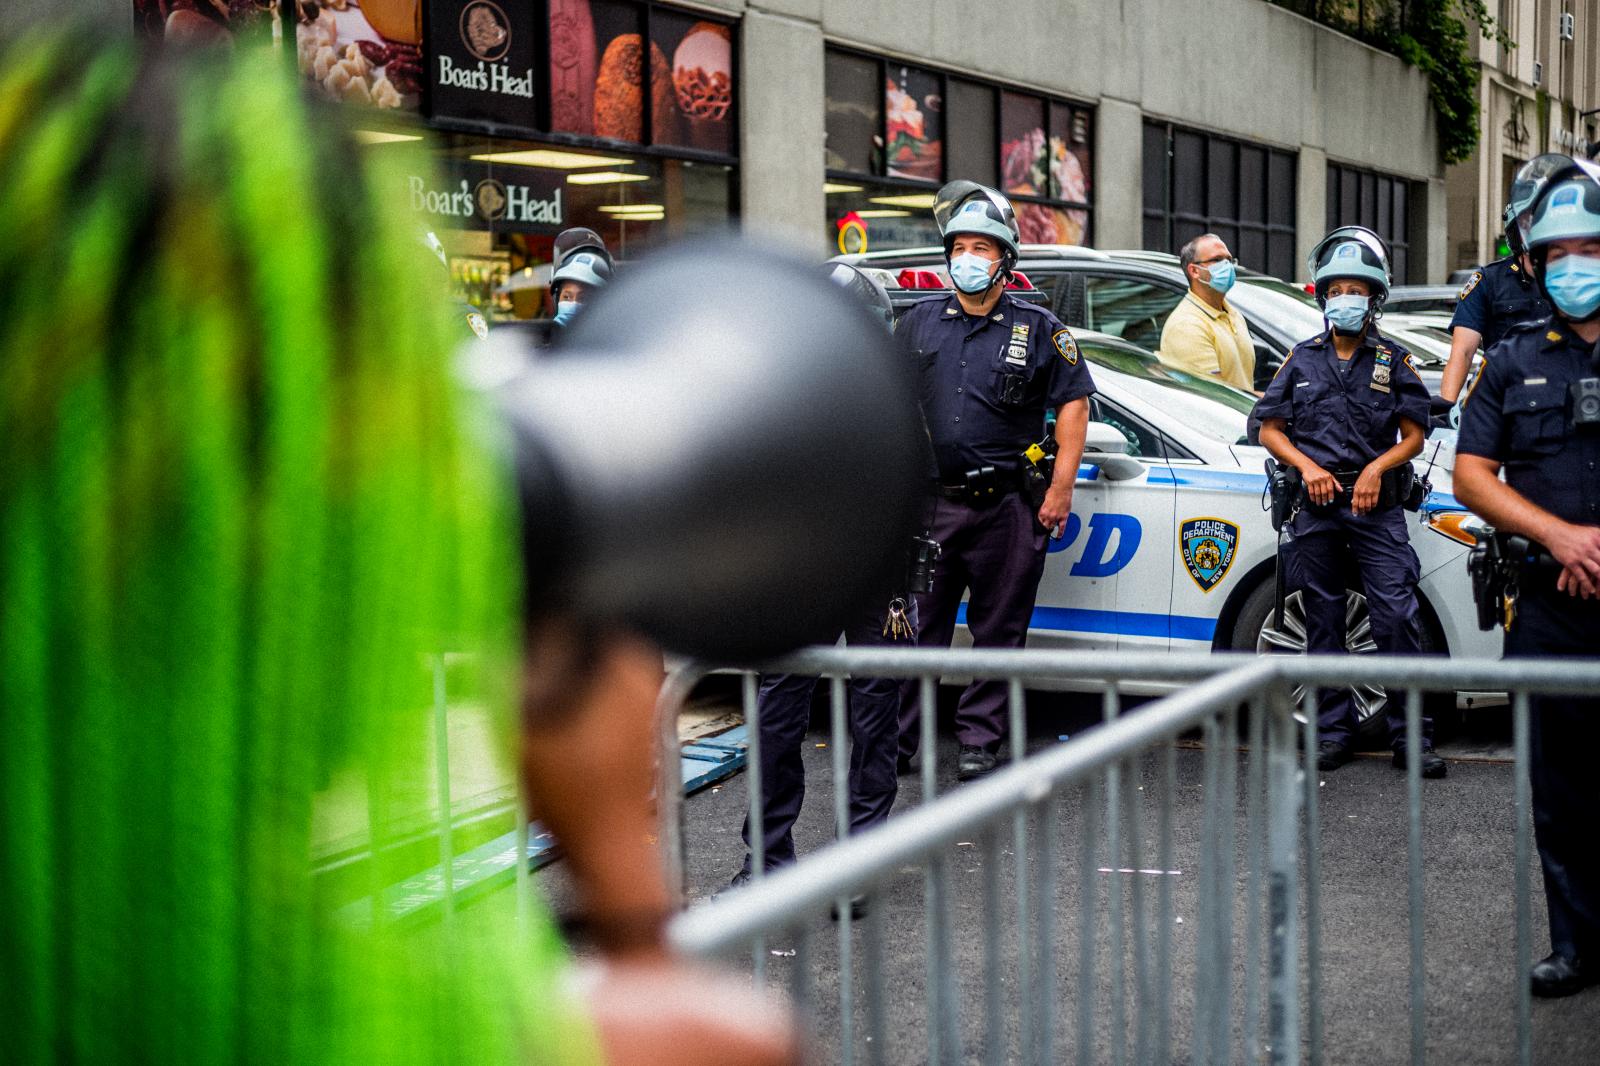 Image from Black Lives Matter -  August 8, 2020  8th Avenue/54th Street Midtown,...